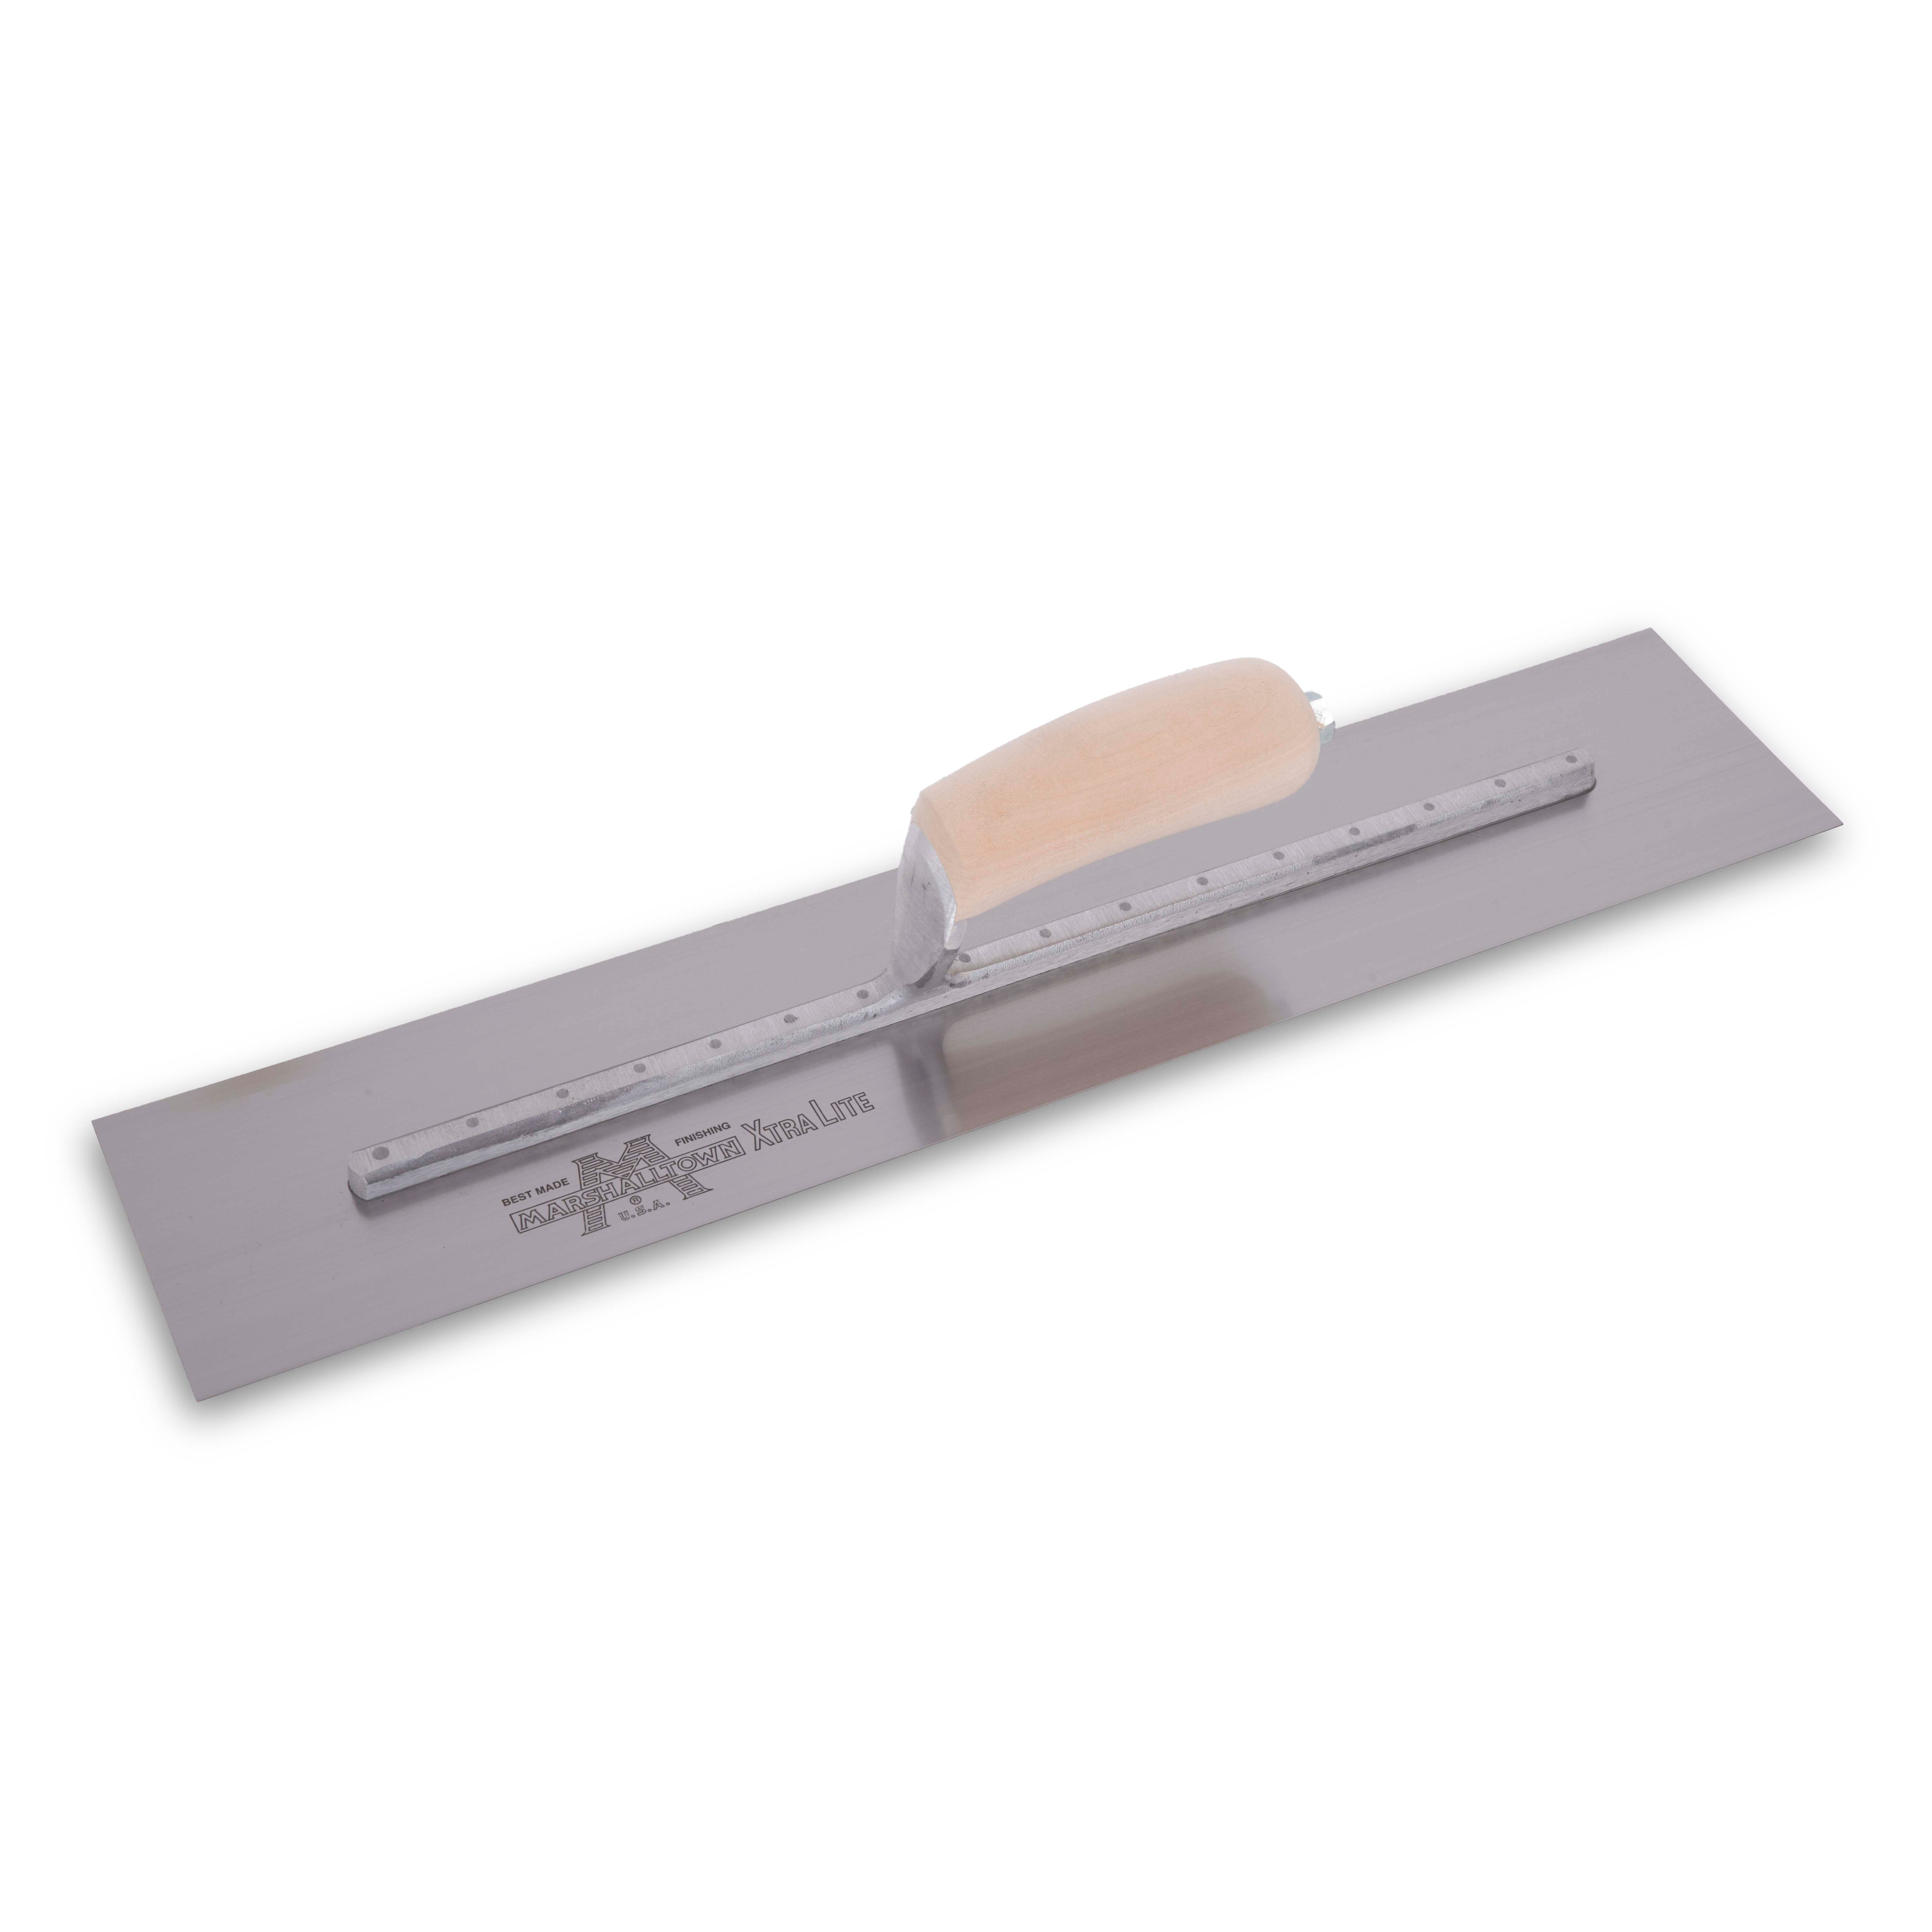 Marshalltown MXS20 20in. x 4in. Finishing Trowel Curved Wood Handle MAT-MXS20